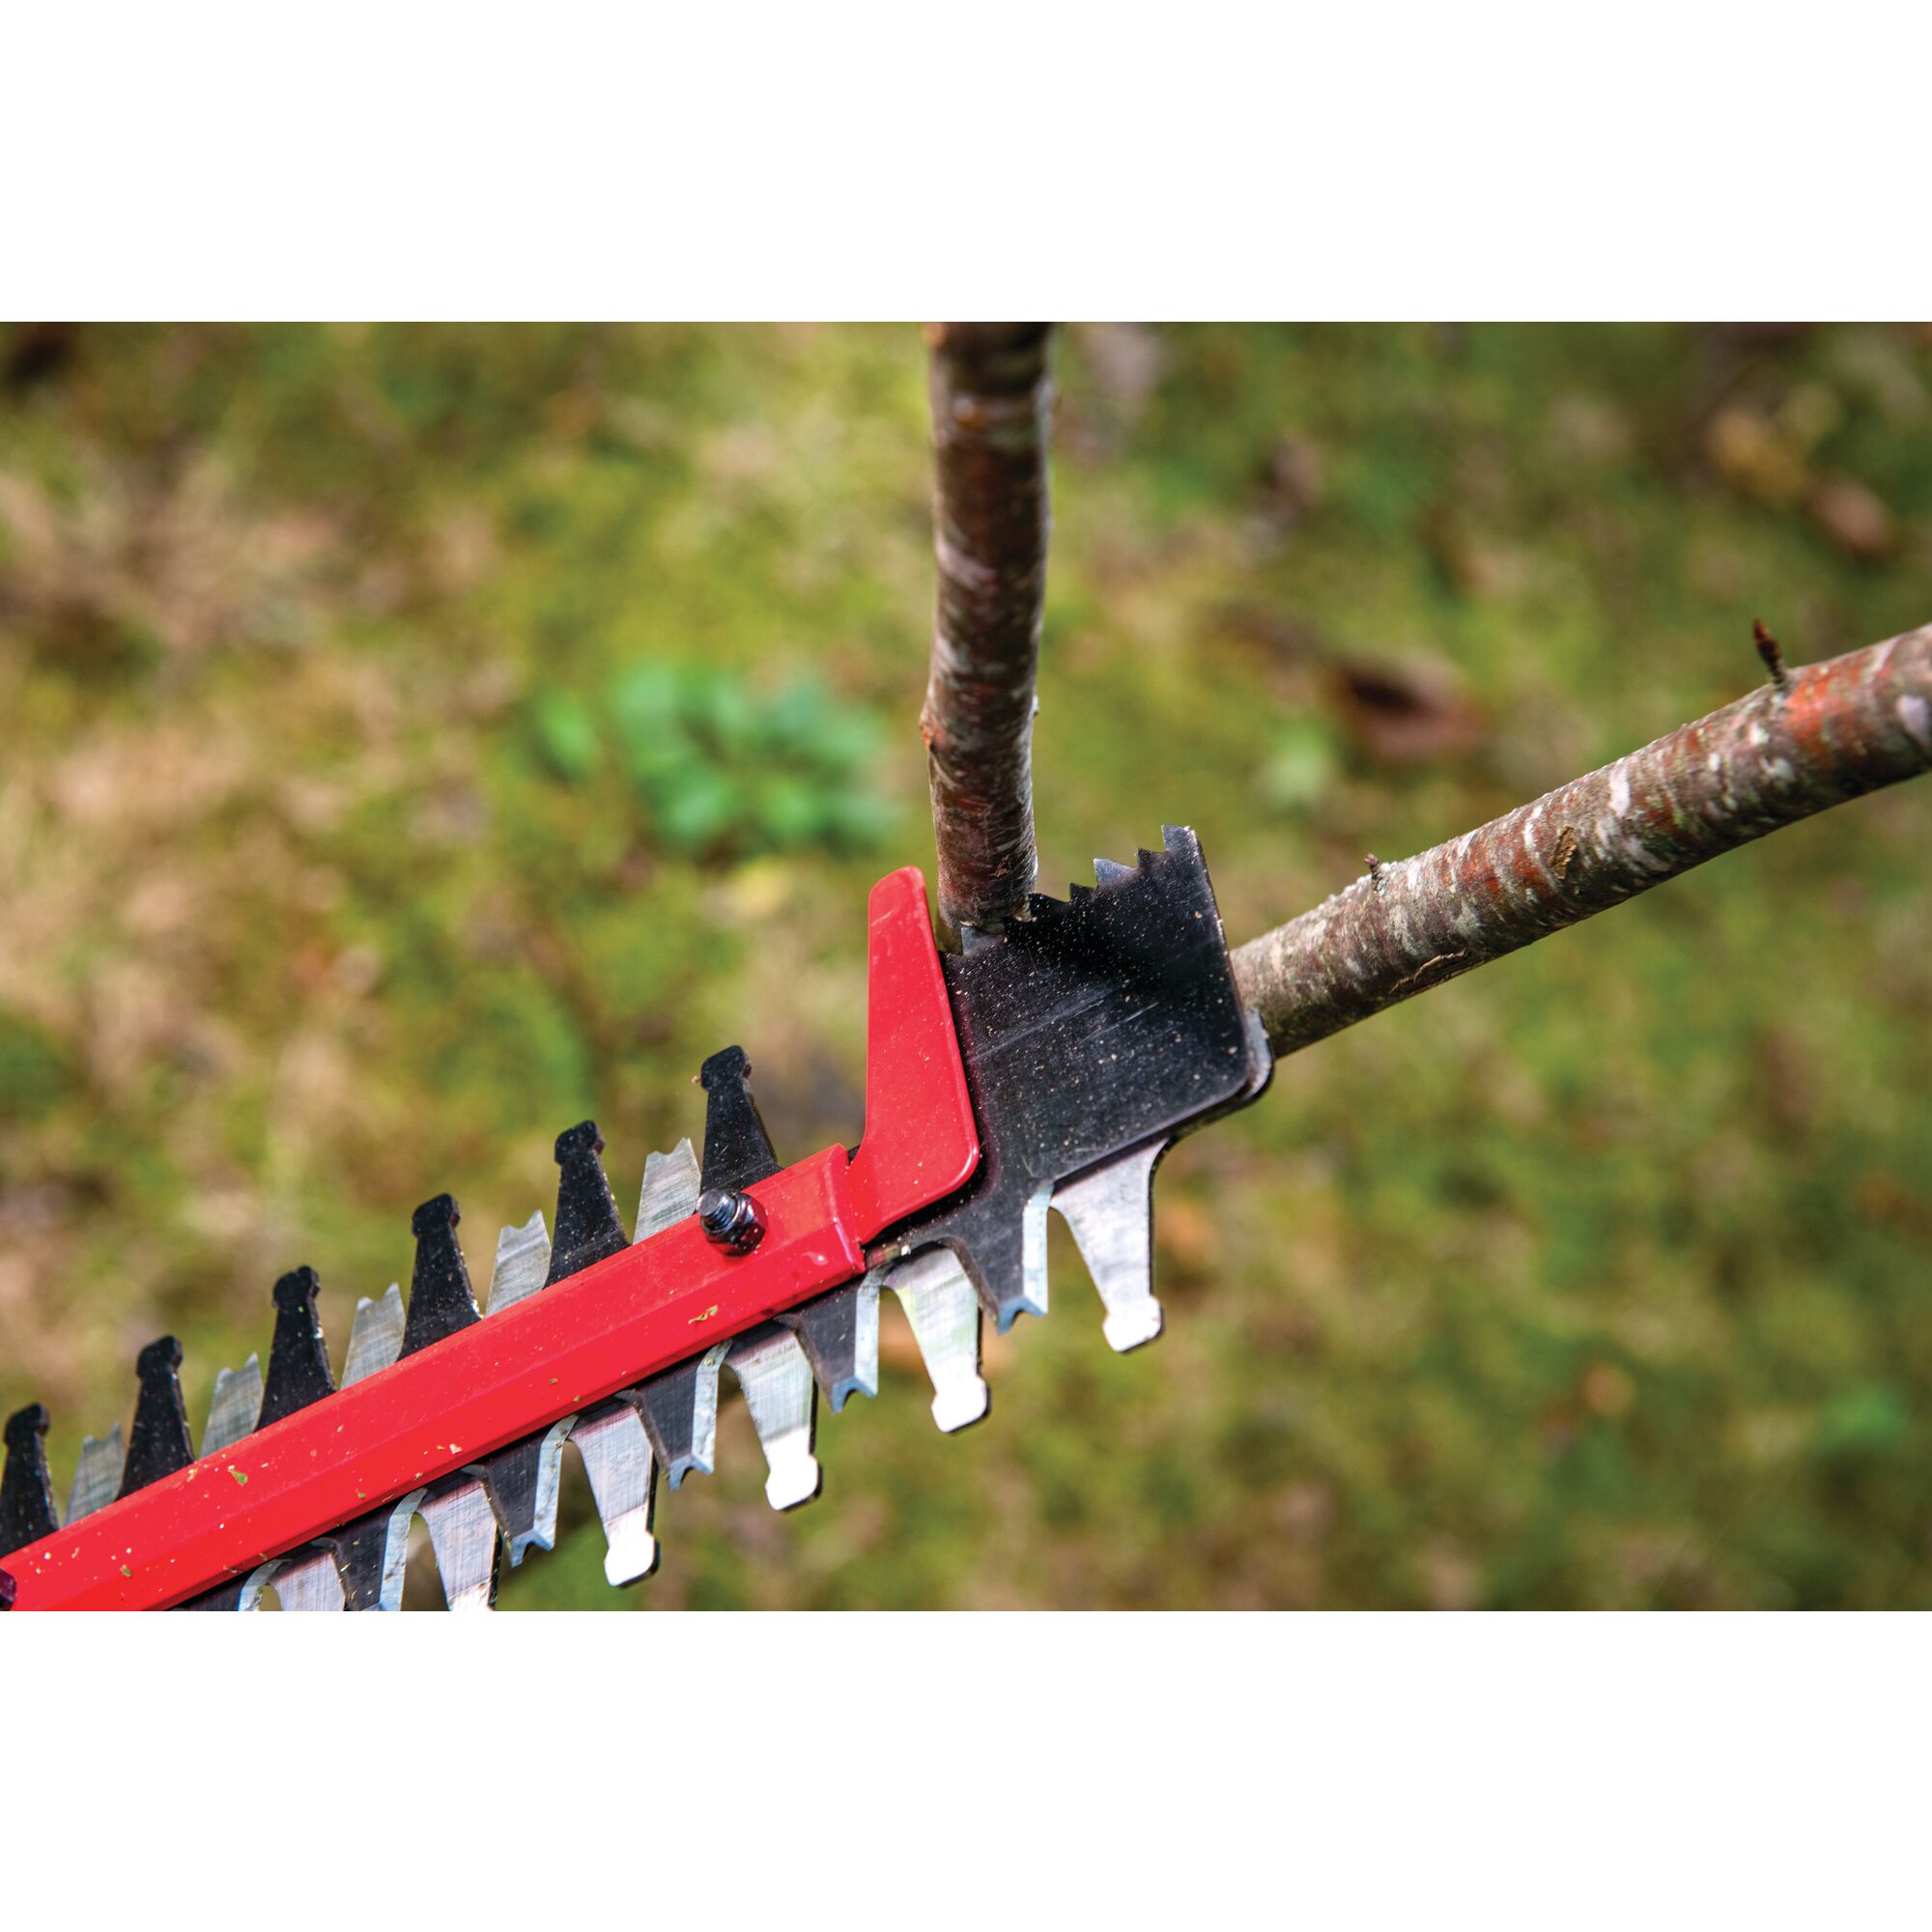 Precise hedge trimming feature of cordless 24 inch hedge trimmer kit 2.5 Ampere hours.